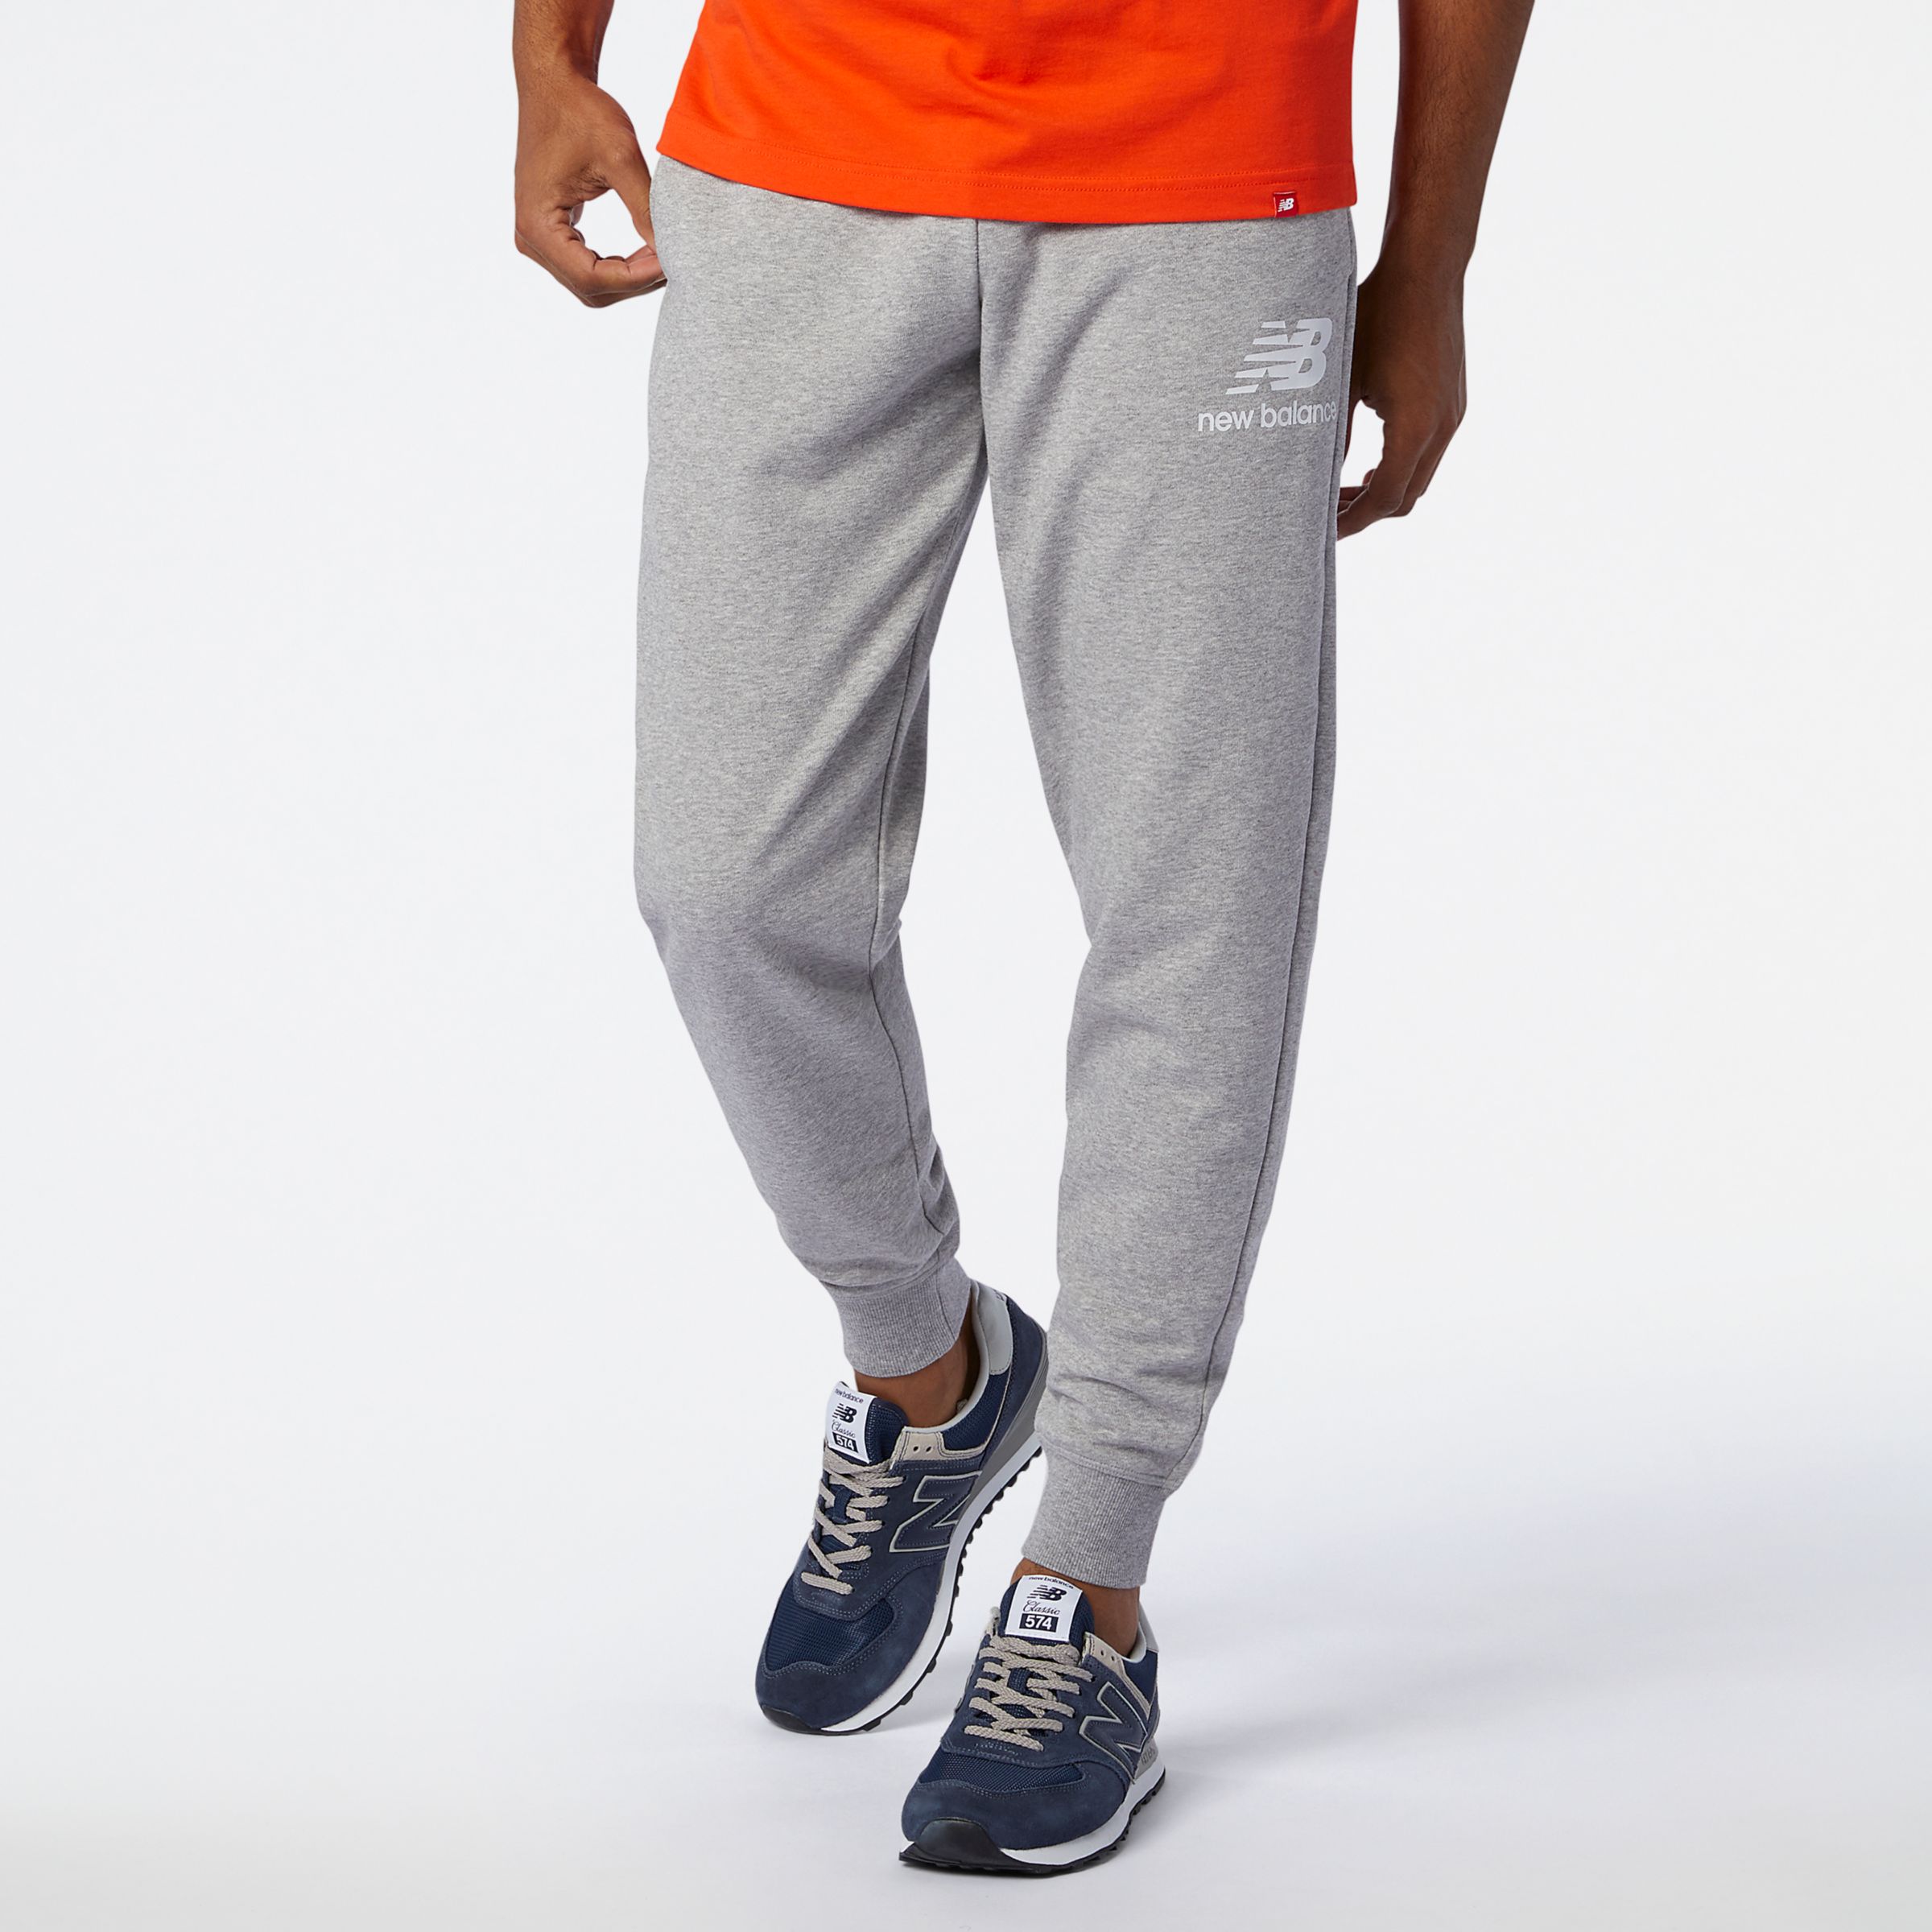 Casual \u0026 Athletic Clothing For Men 